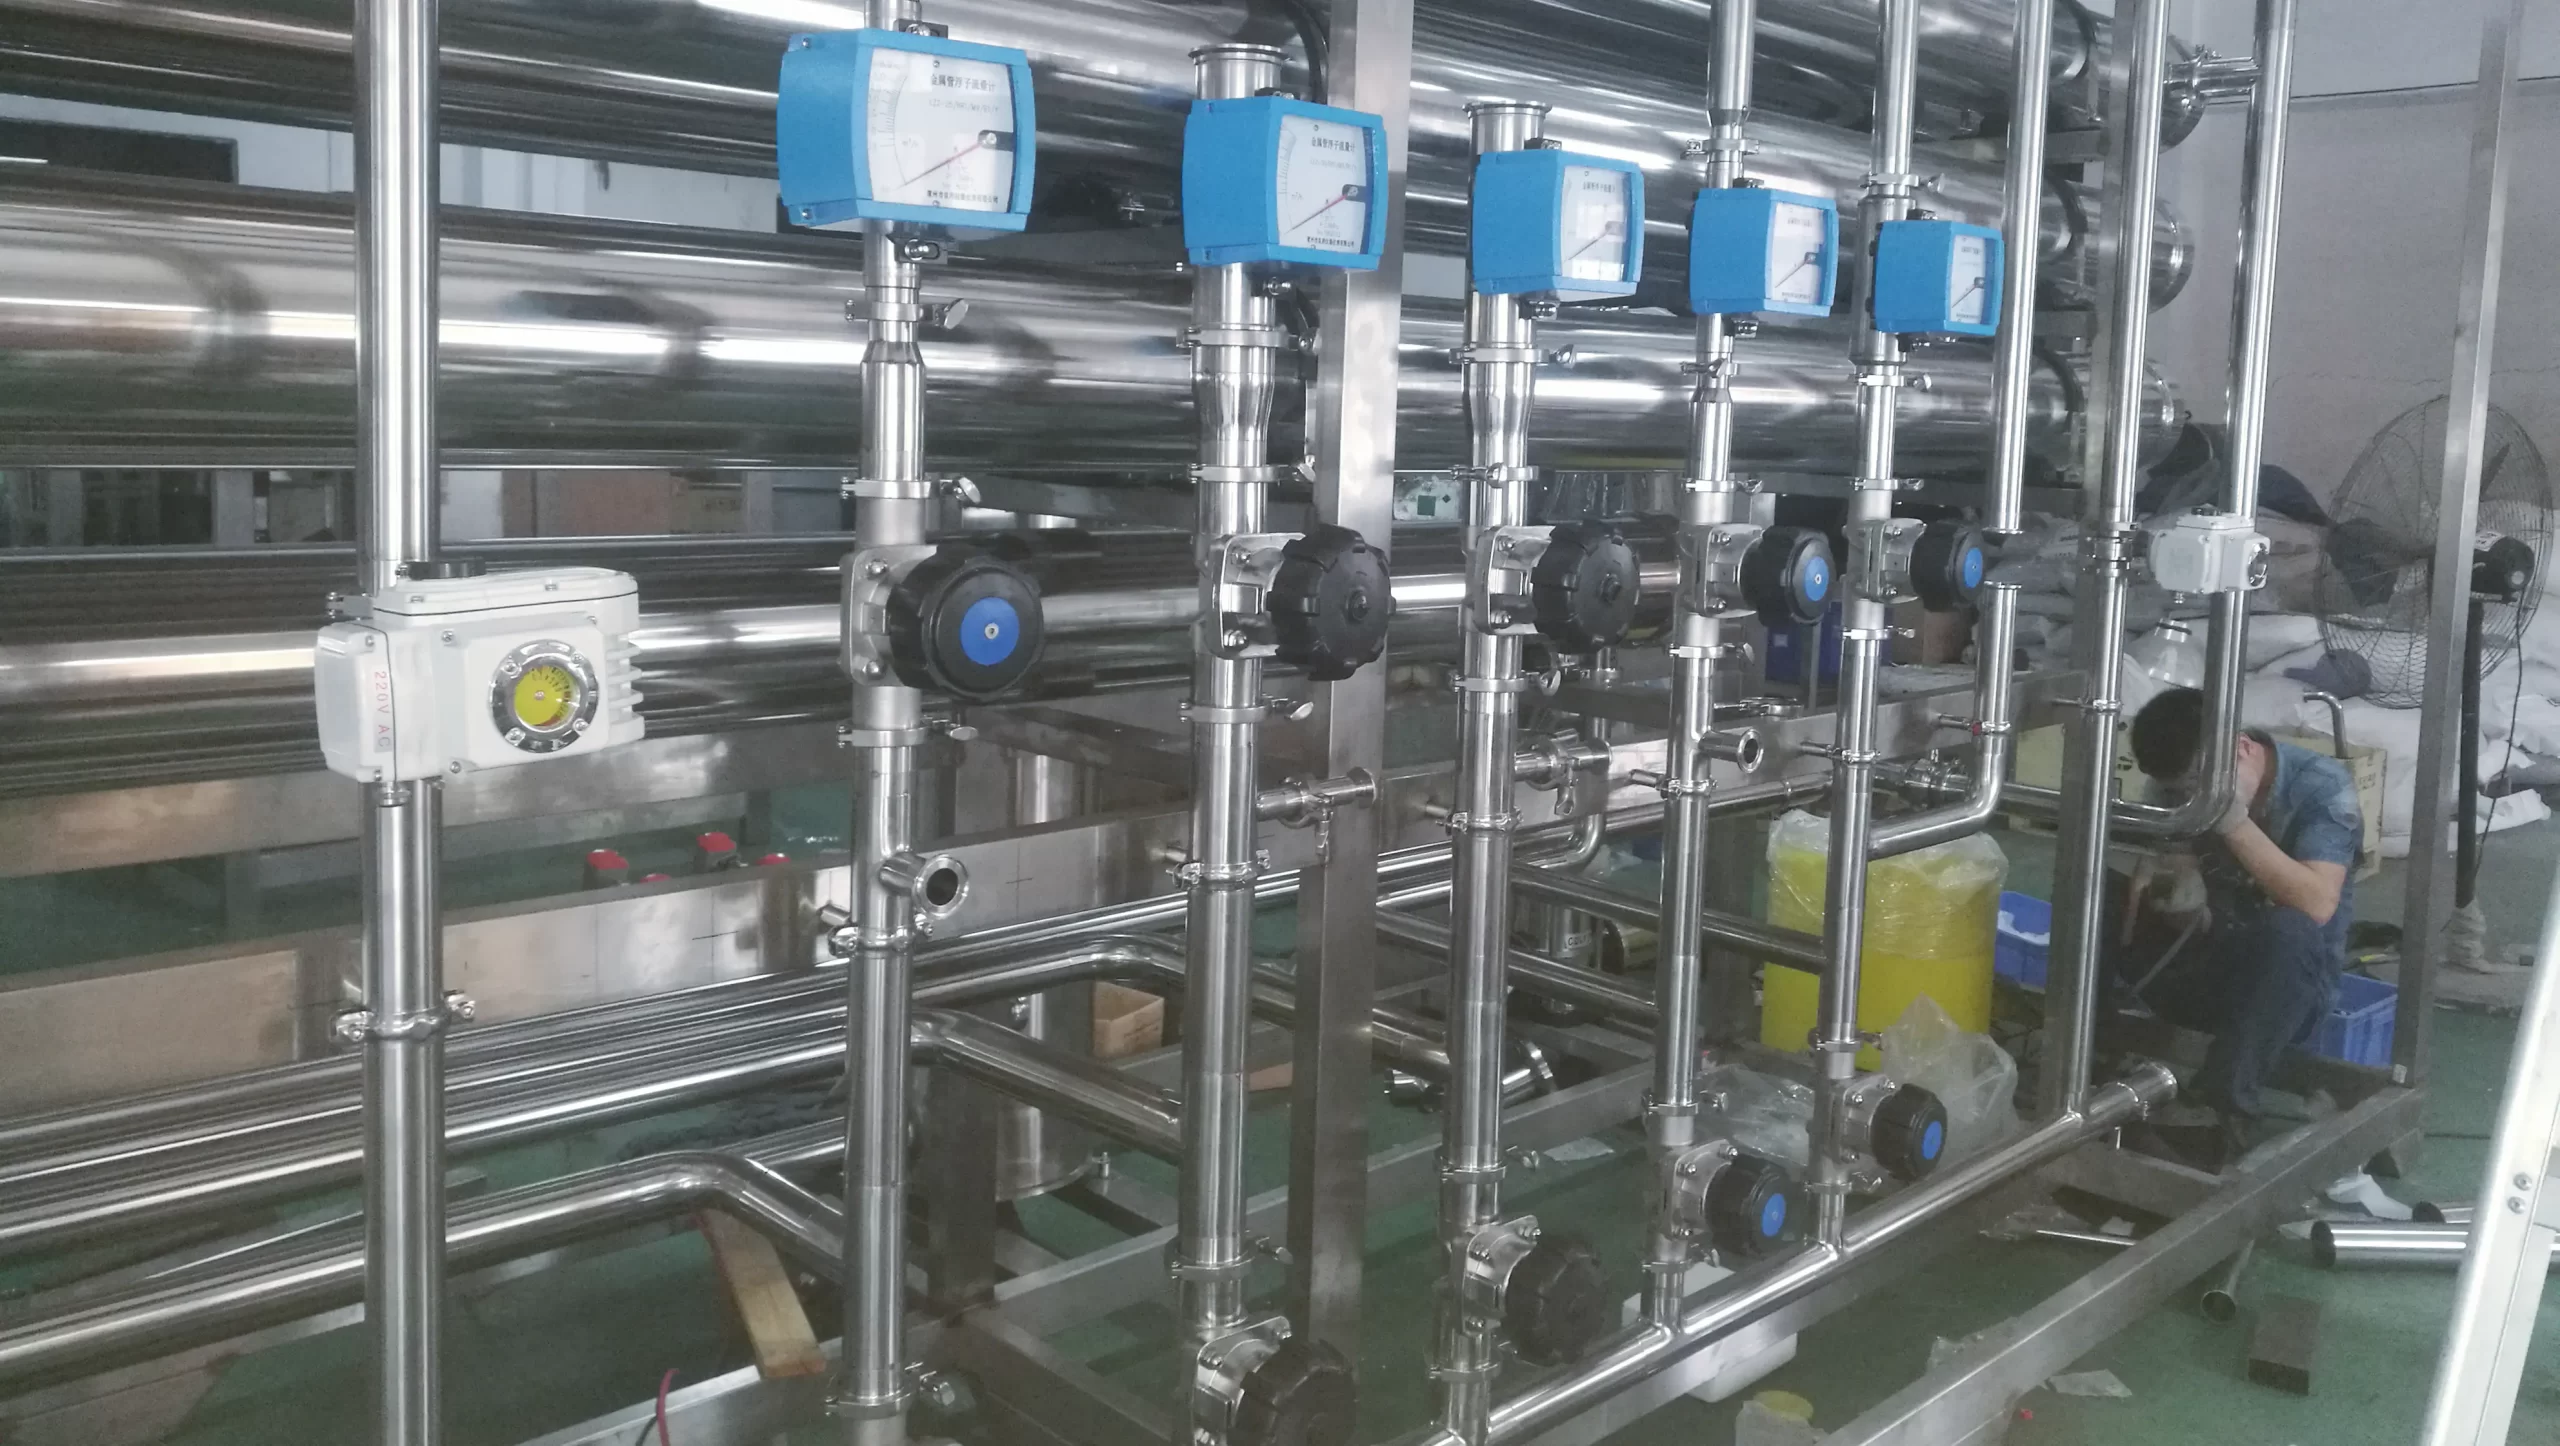 Motorized ball valves are used in water purification equipment